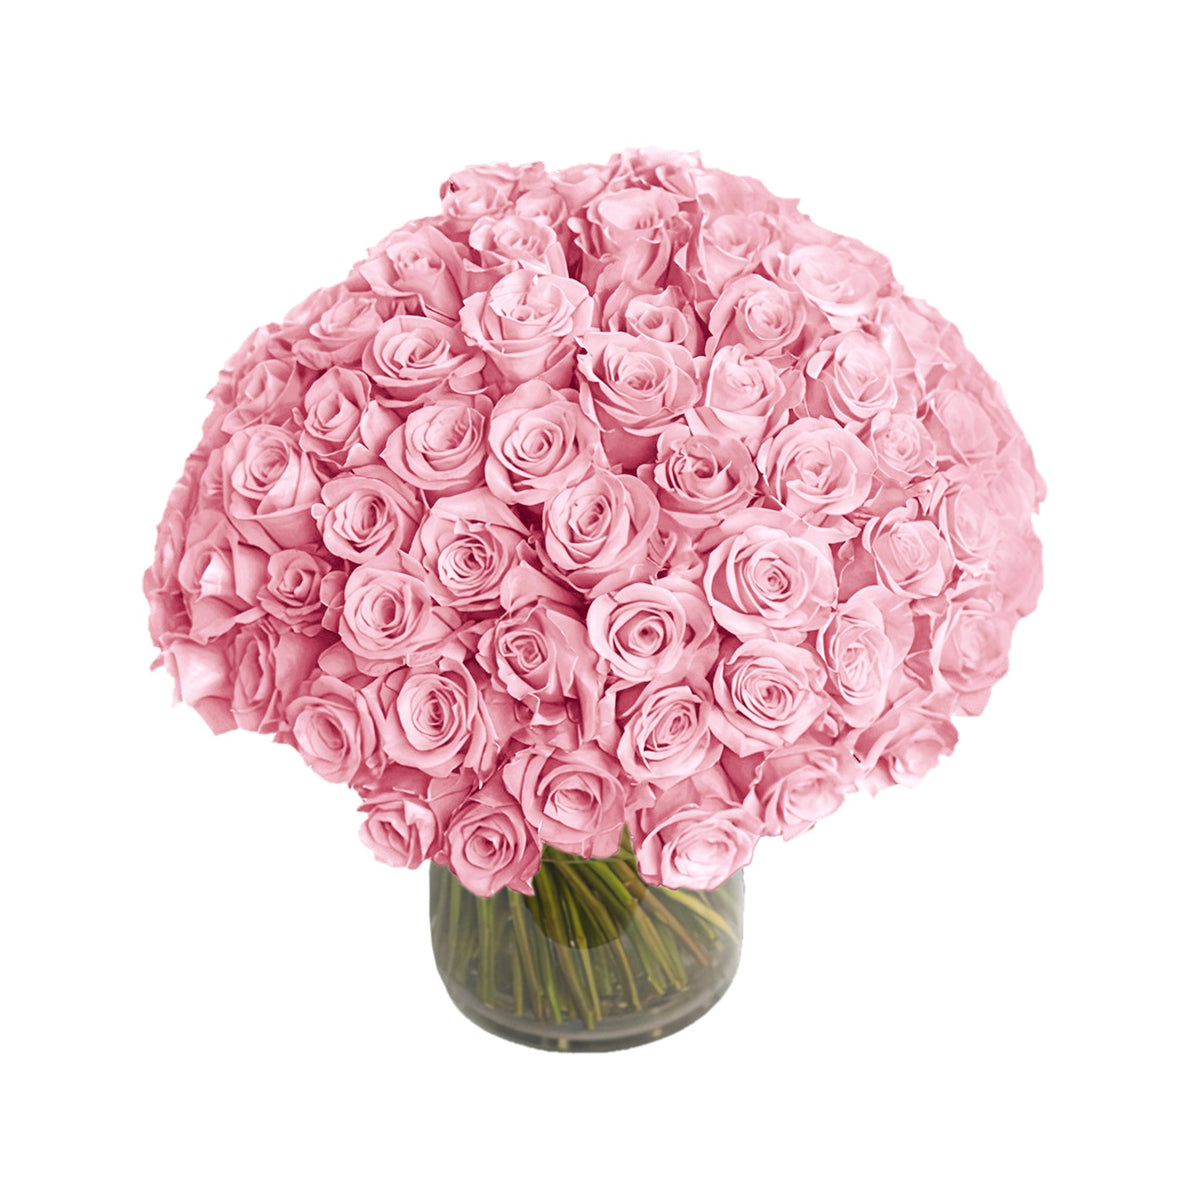 Queens Flower Delivery - Fresh Roses in a Crystal Vase | Light Pink - 100 Roses